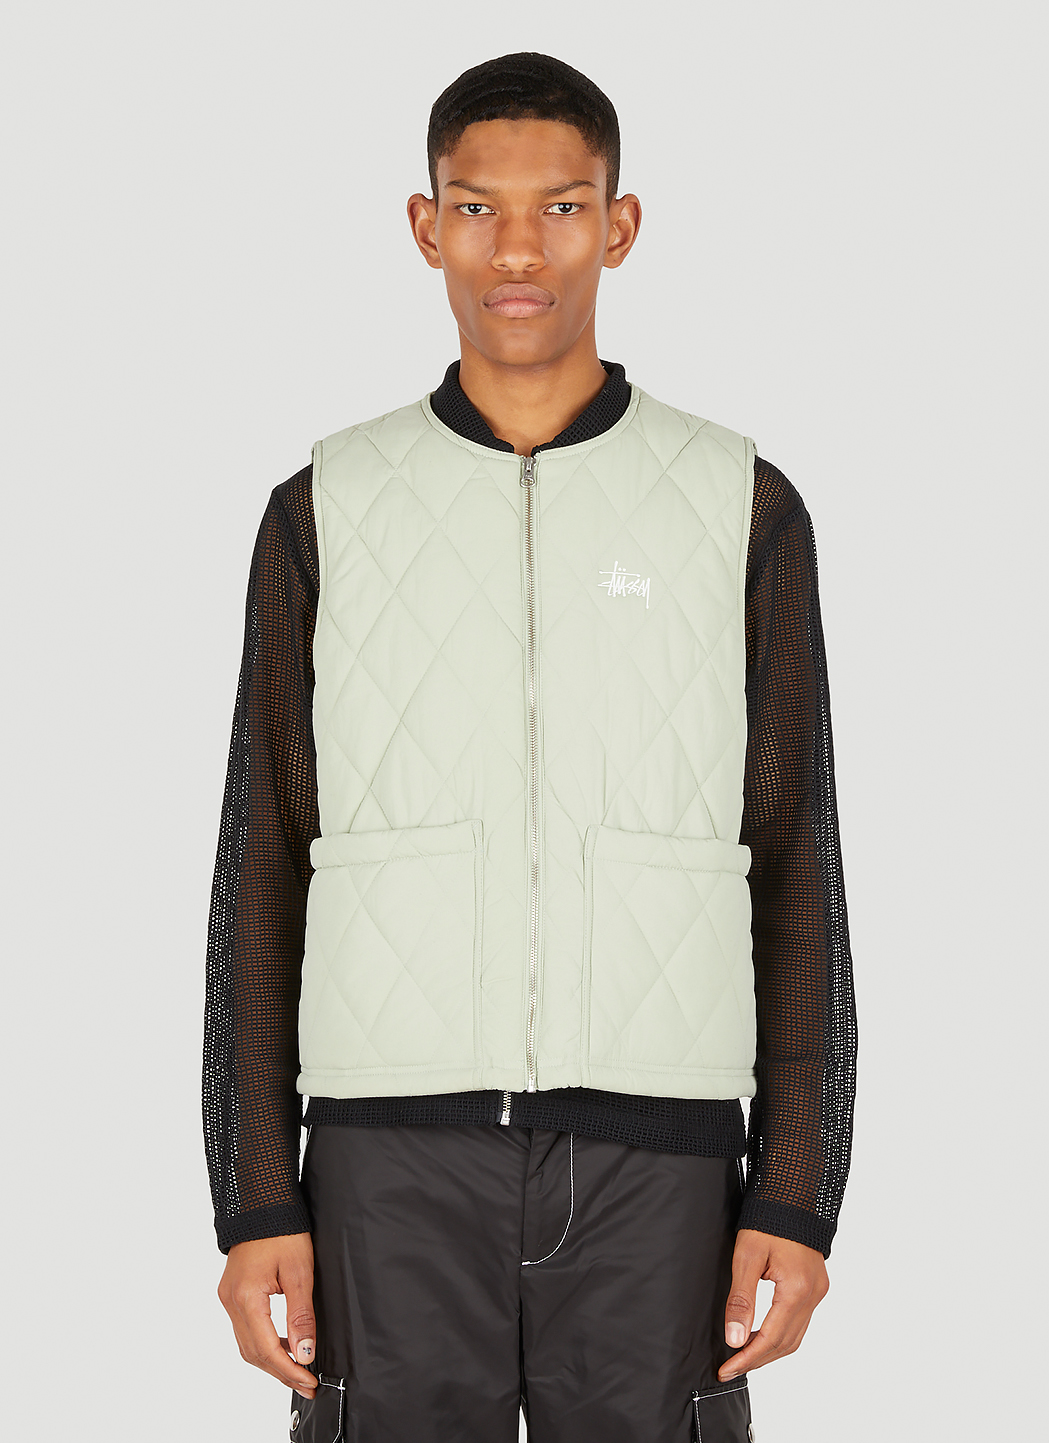 Stüssy DIAMOND QUILTED VEST in White | LN-CC®